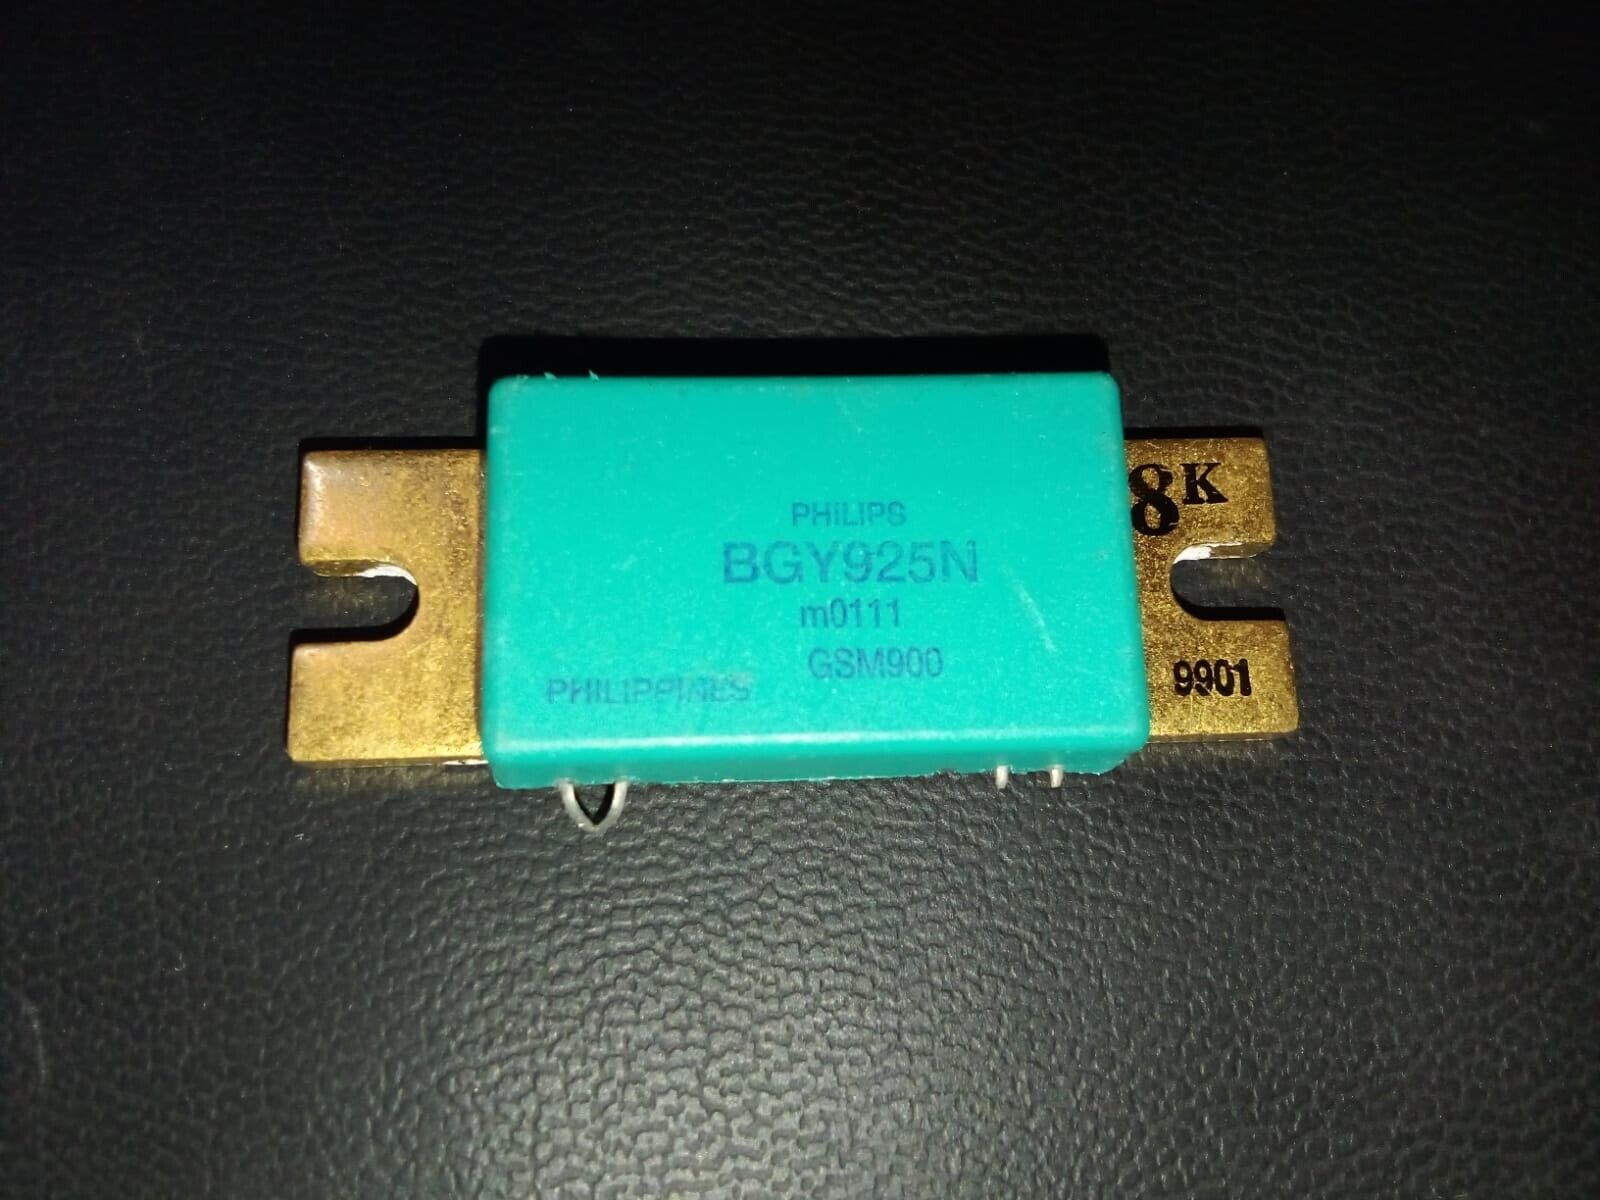 PHILIPS BGY925N GSM900 TRANSISTOR FOR GOLD RECOVERY COLLECTION